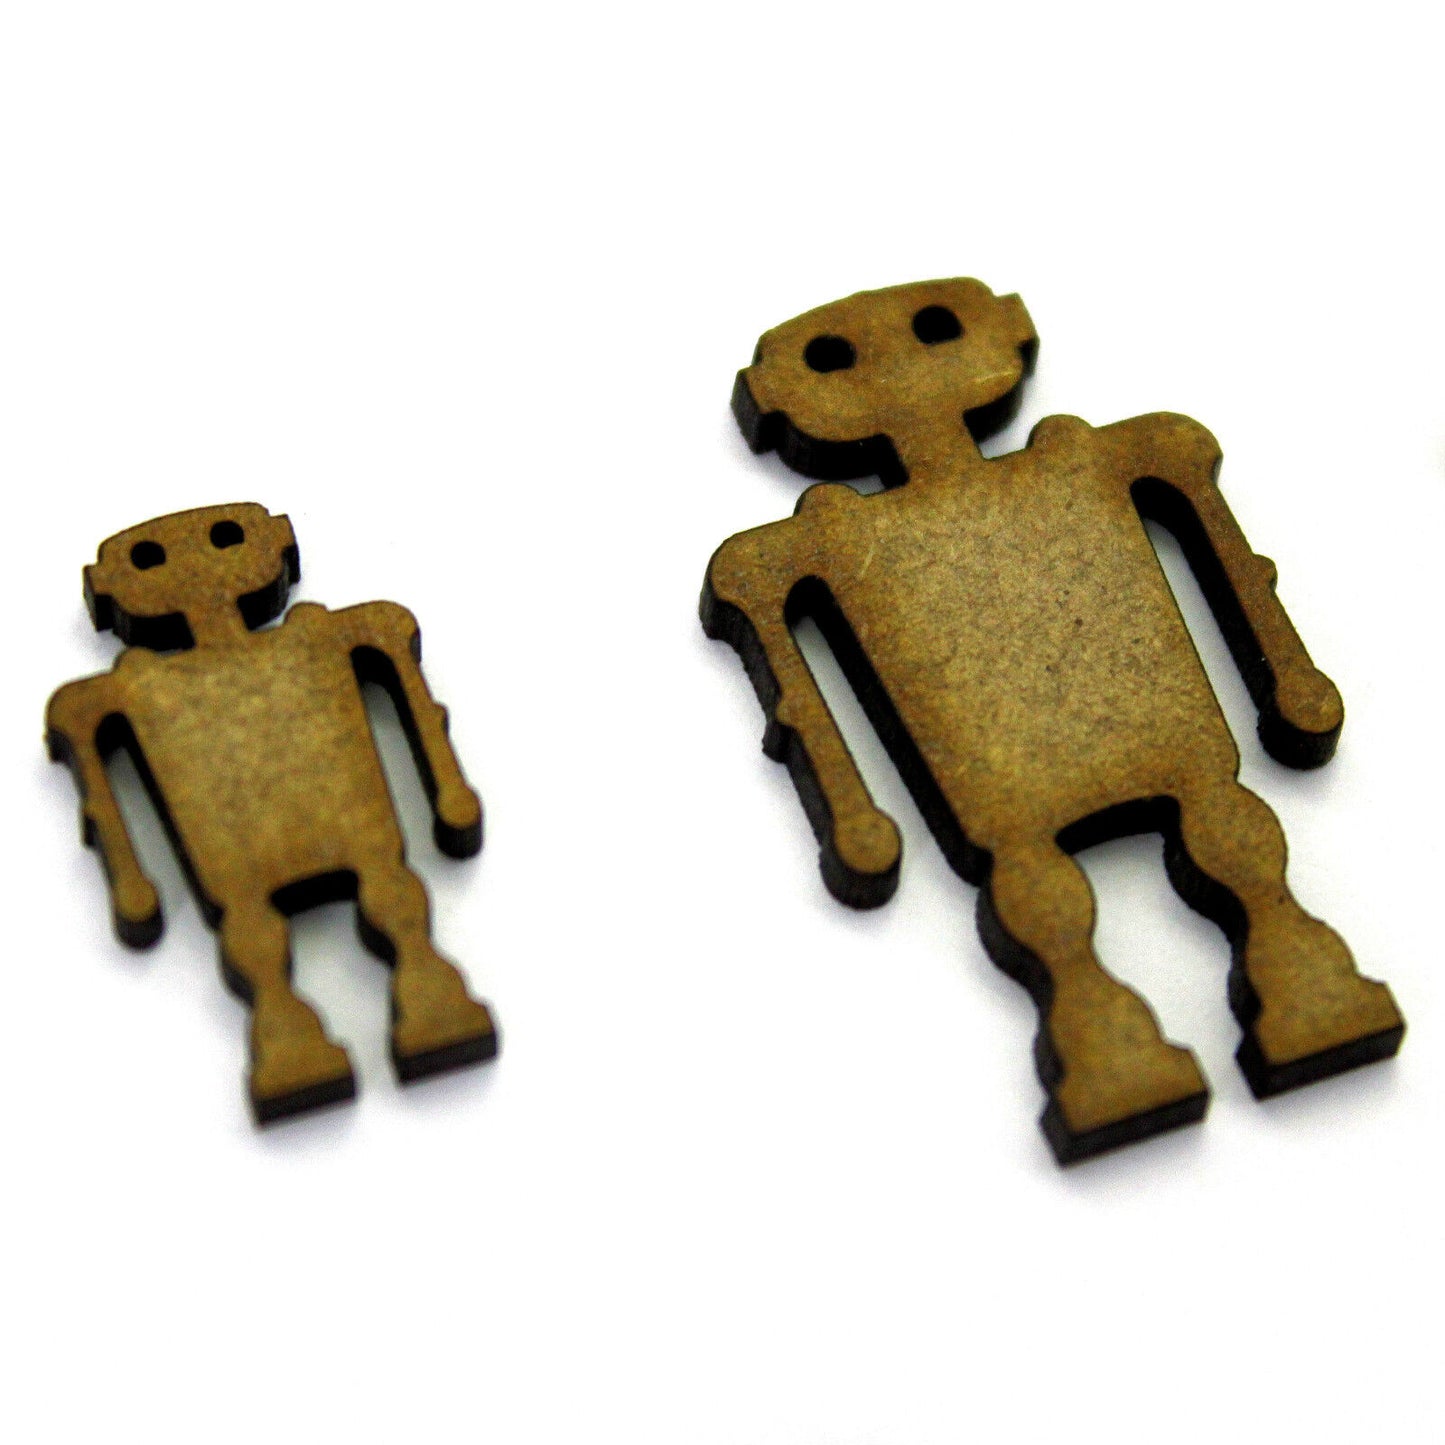 Robot / Droid Craft Shapes, Embellishments, Tags, Decoraions. 2mm MDF Wood